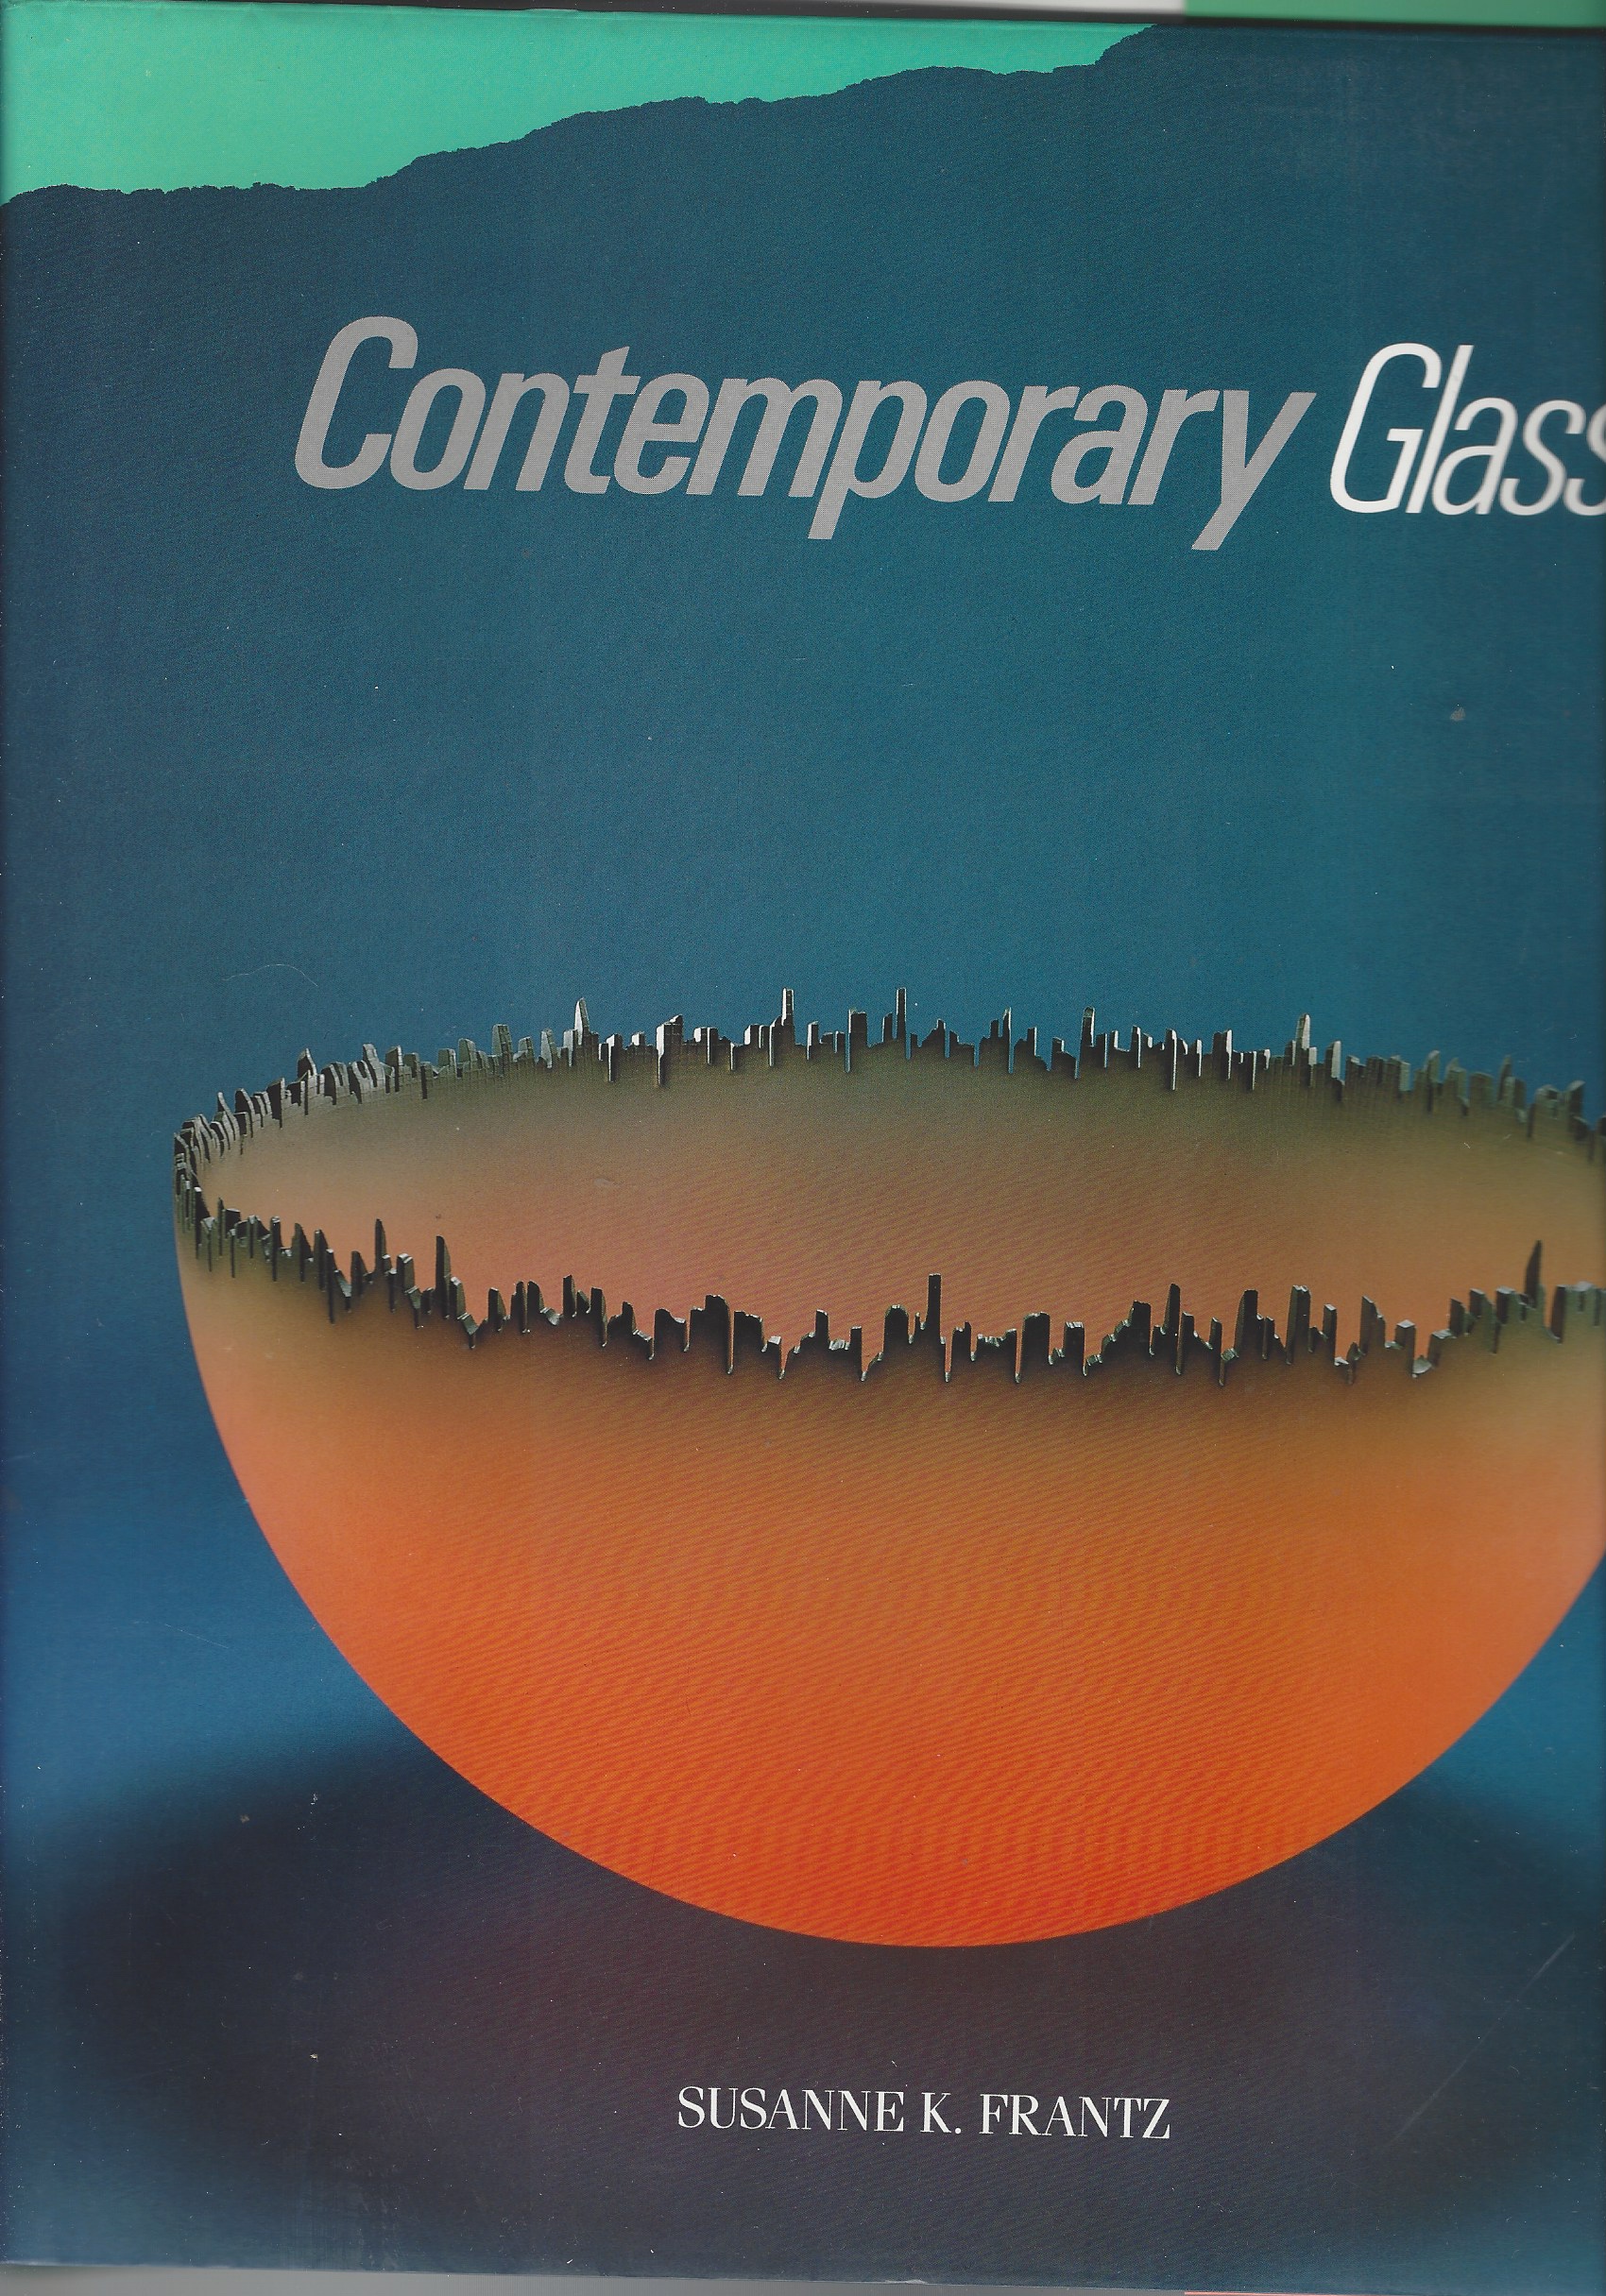 FRANTZ, SUSANNE K. - Contemporary Glass: A World Survey from the Corning Museum of Glass